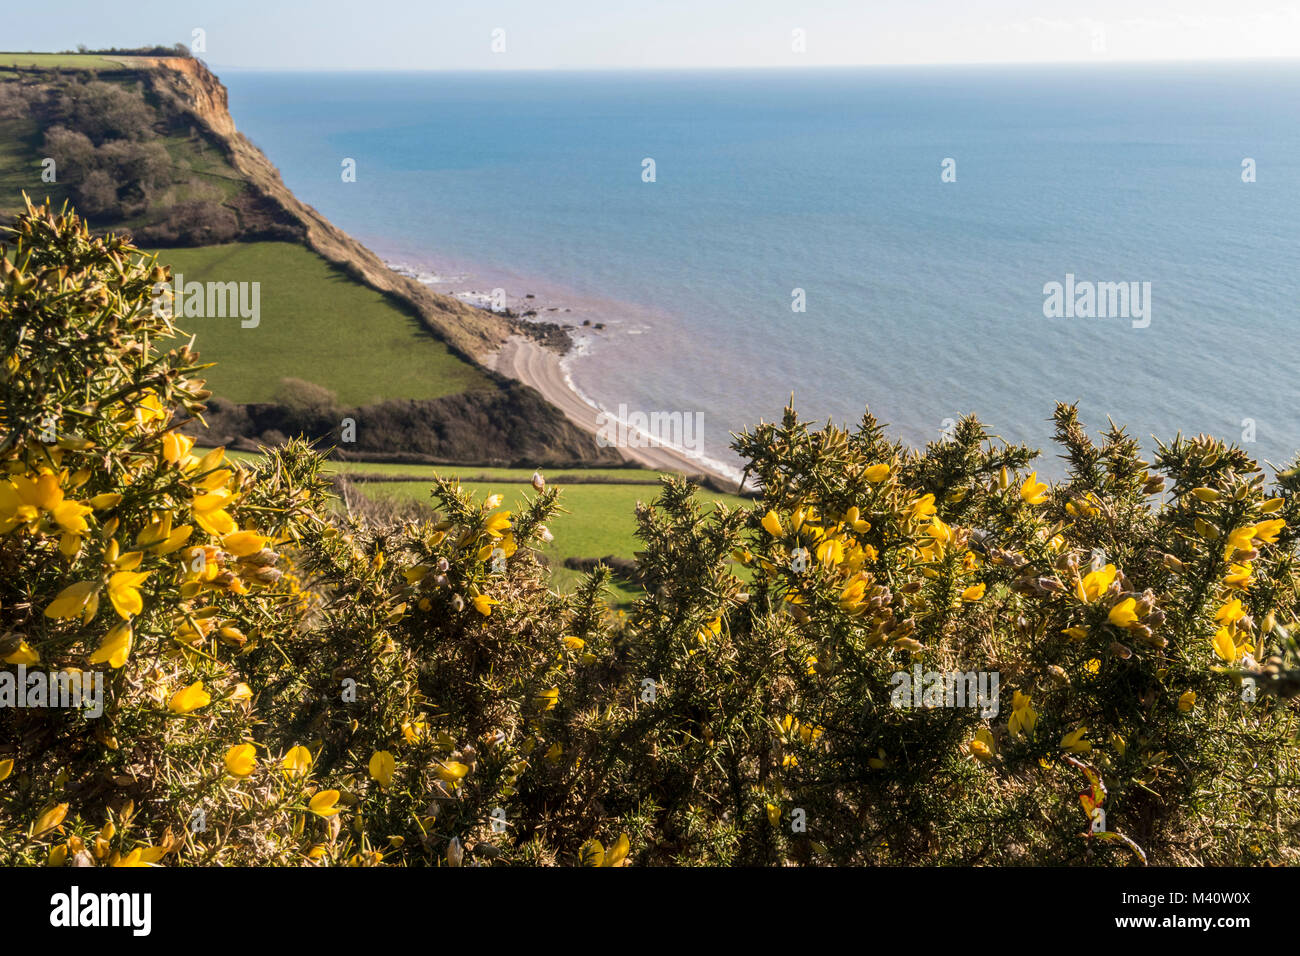 Gorse bushes in flower overlooking Salcombe Mouth on the South West Coastal Path between Sidmouth and Beer. Stock Photo